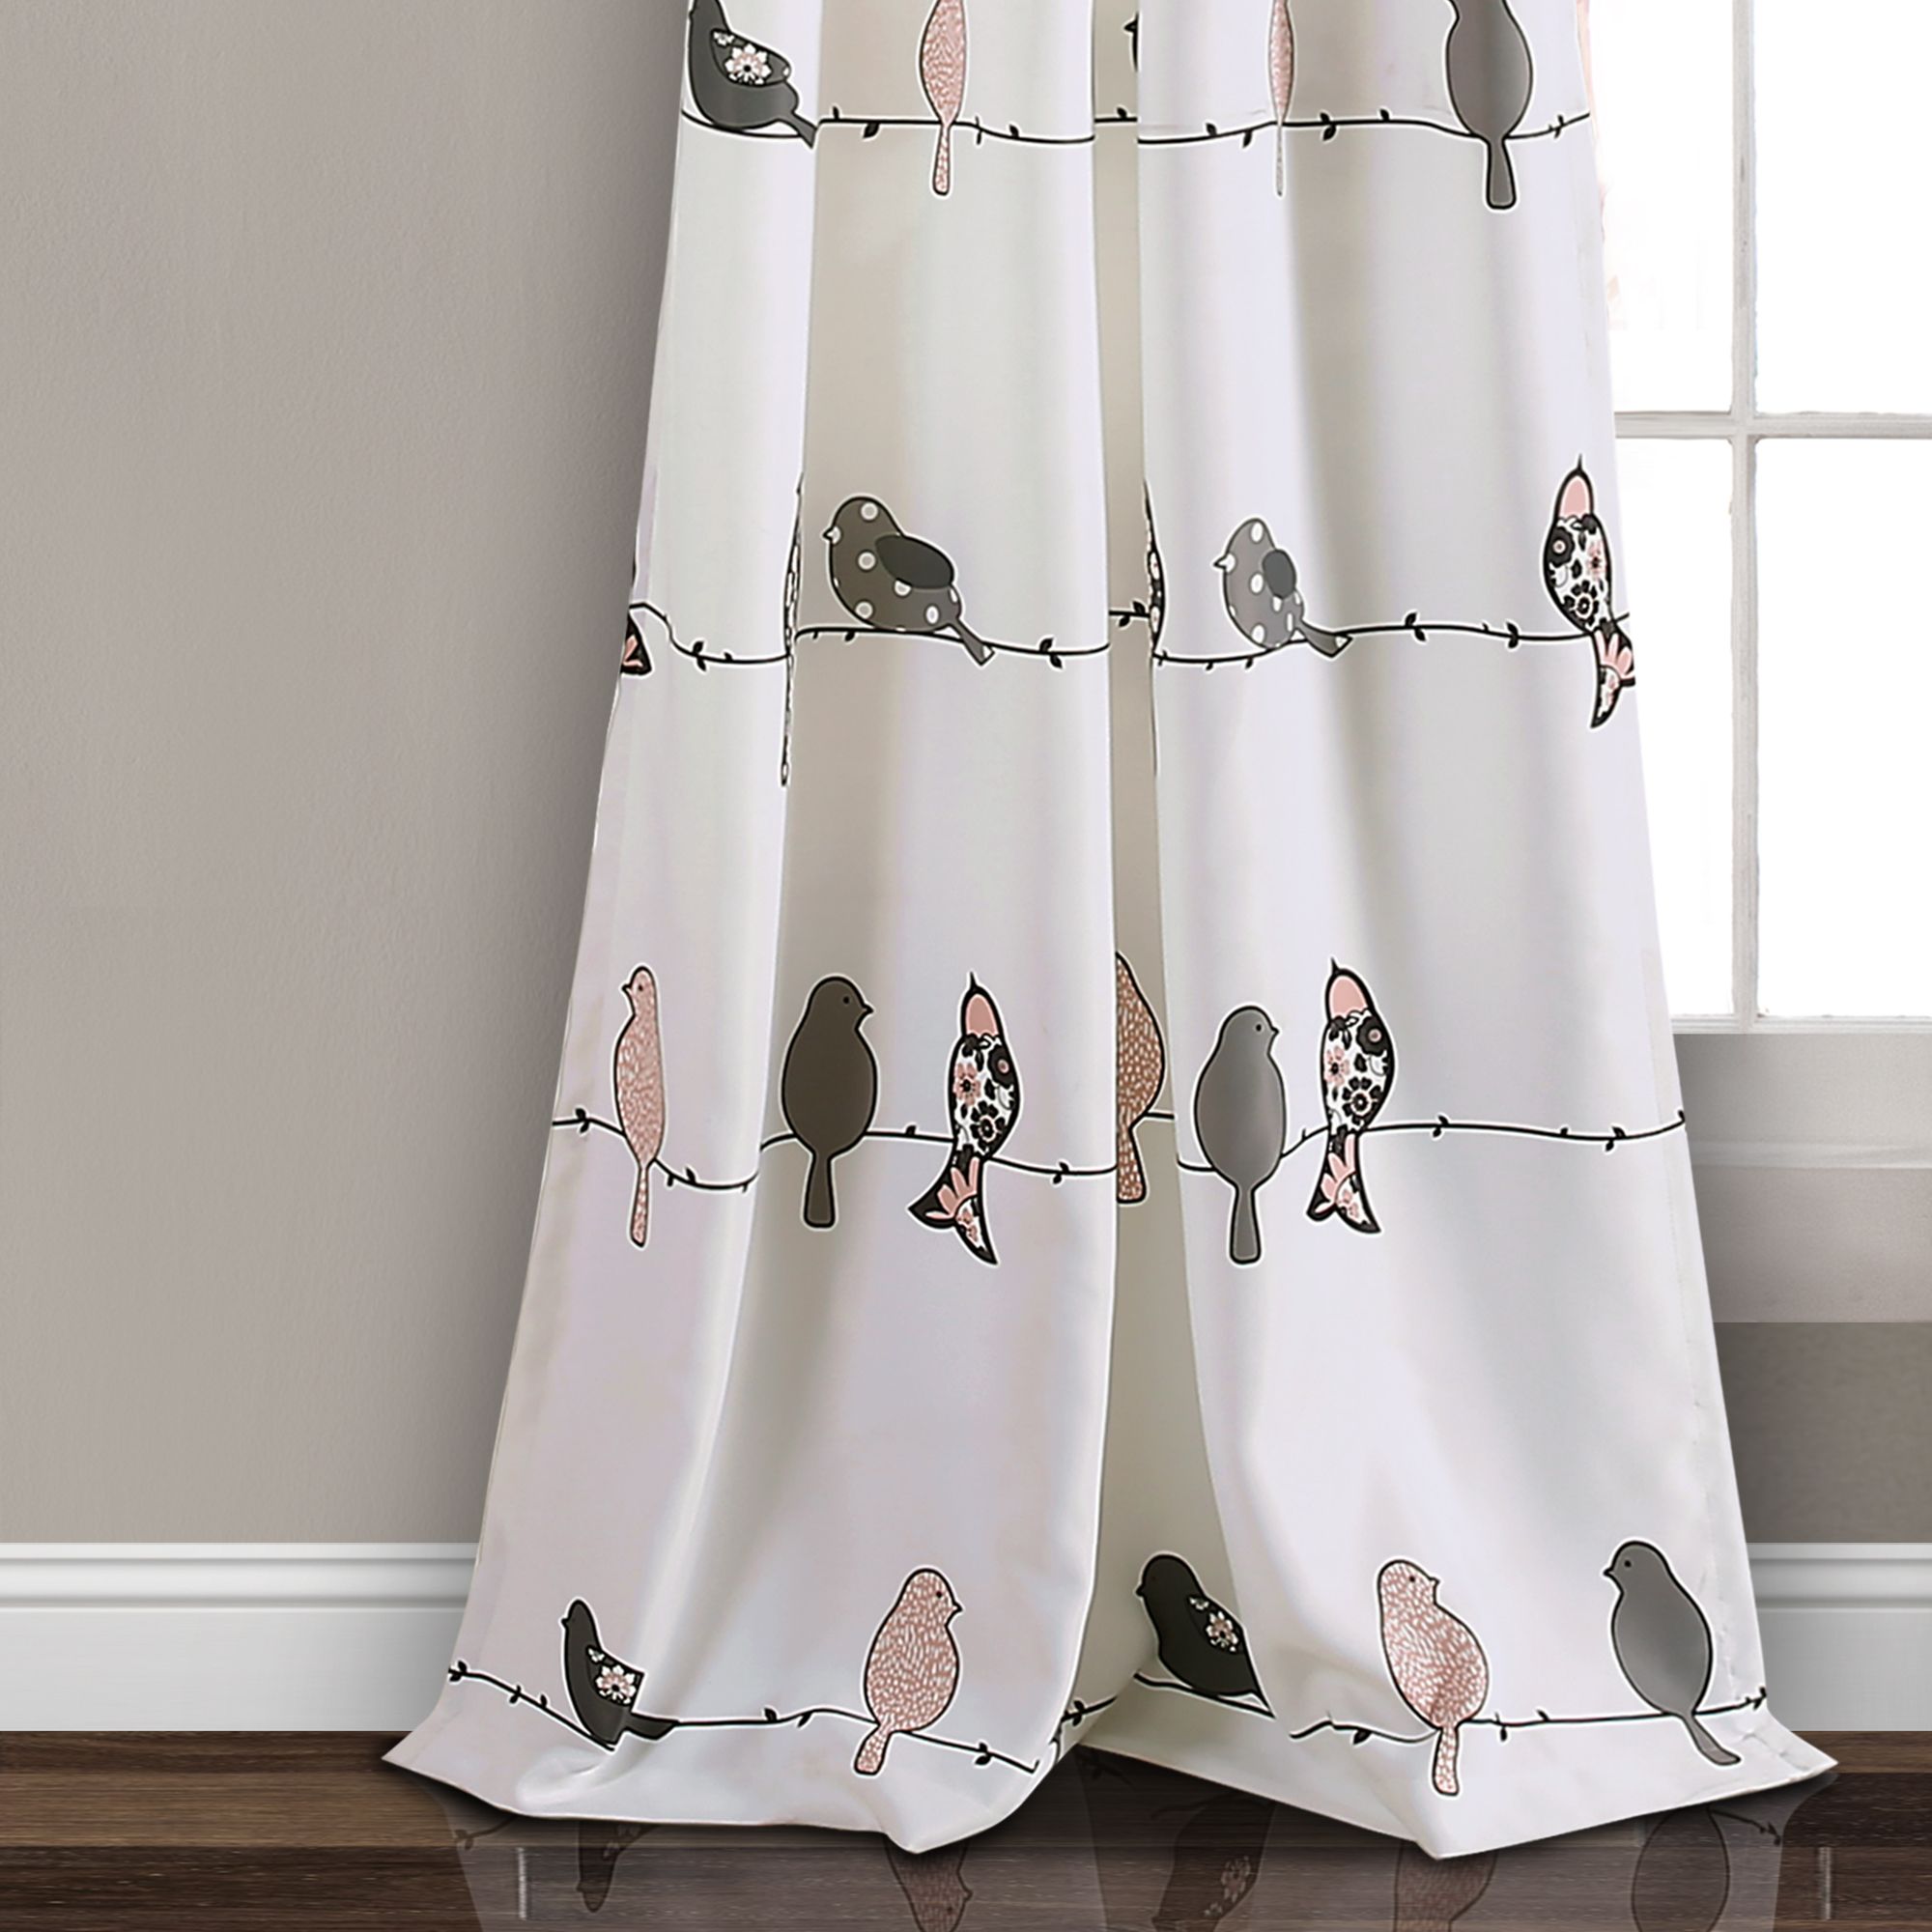 Details About Rowley Birds Room Darkening Window Curtain Panels Blush/gray  Set 52x84+2 Intended For Rowley Birds Room Darkening Curtain Panel Pairs (View 12 of 20)